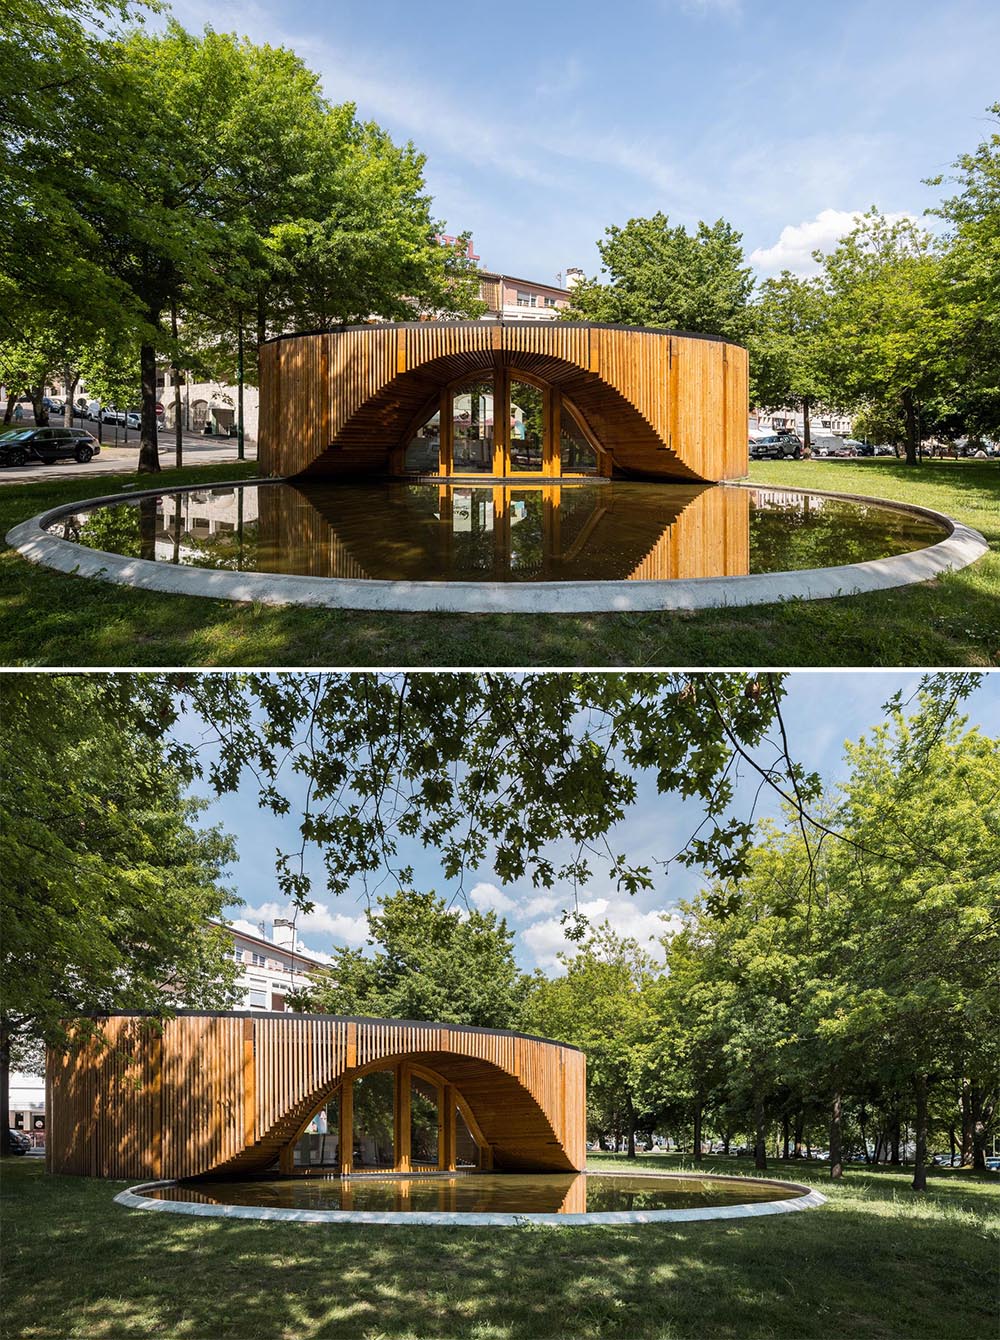 The circular design of this modern building is accented by a reflection pool and wood slat exterior.